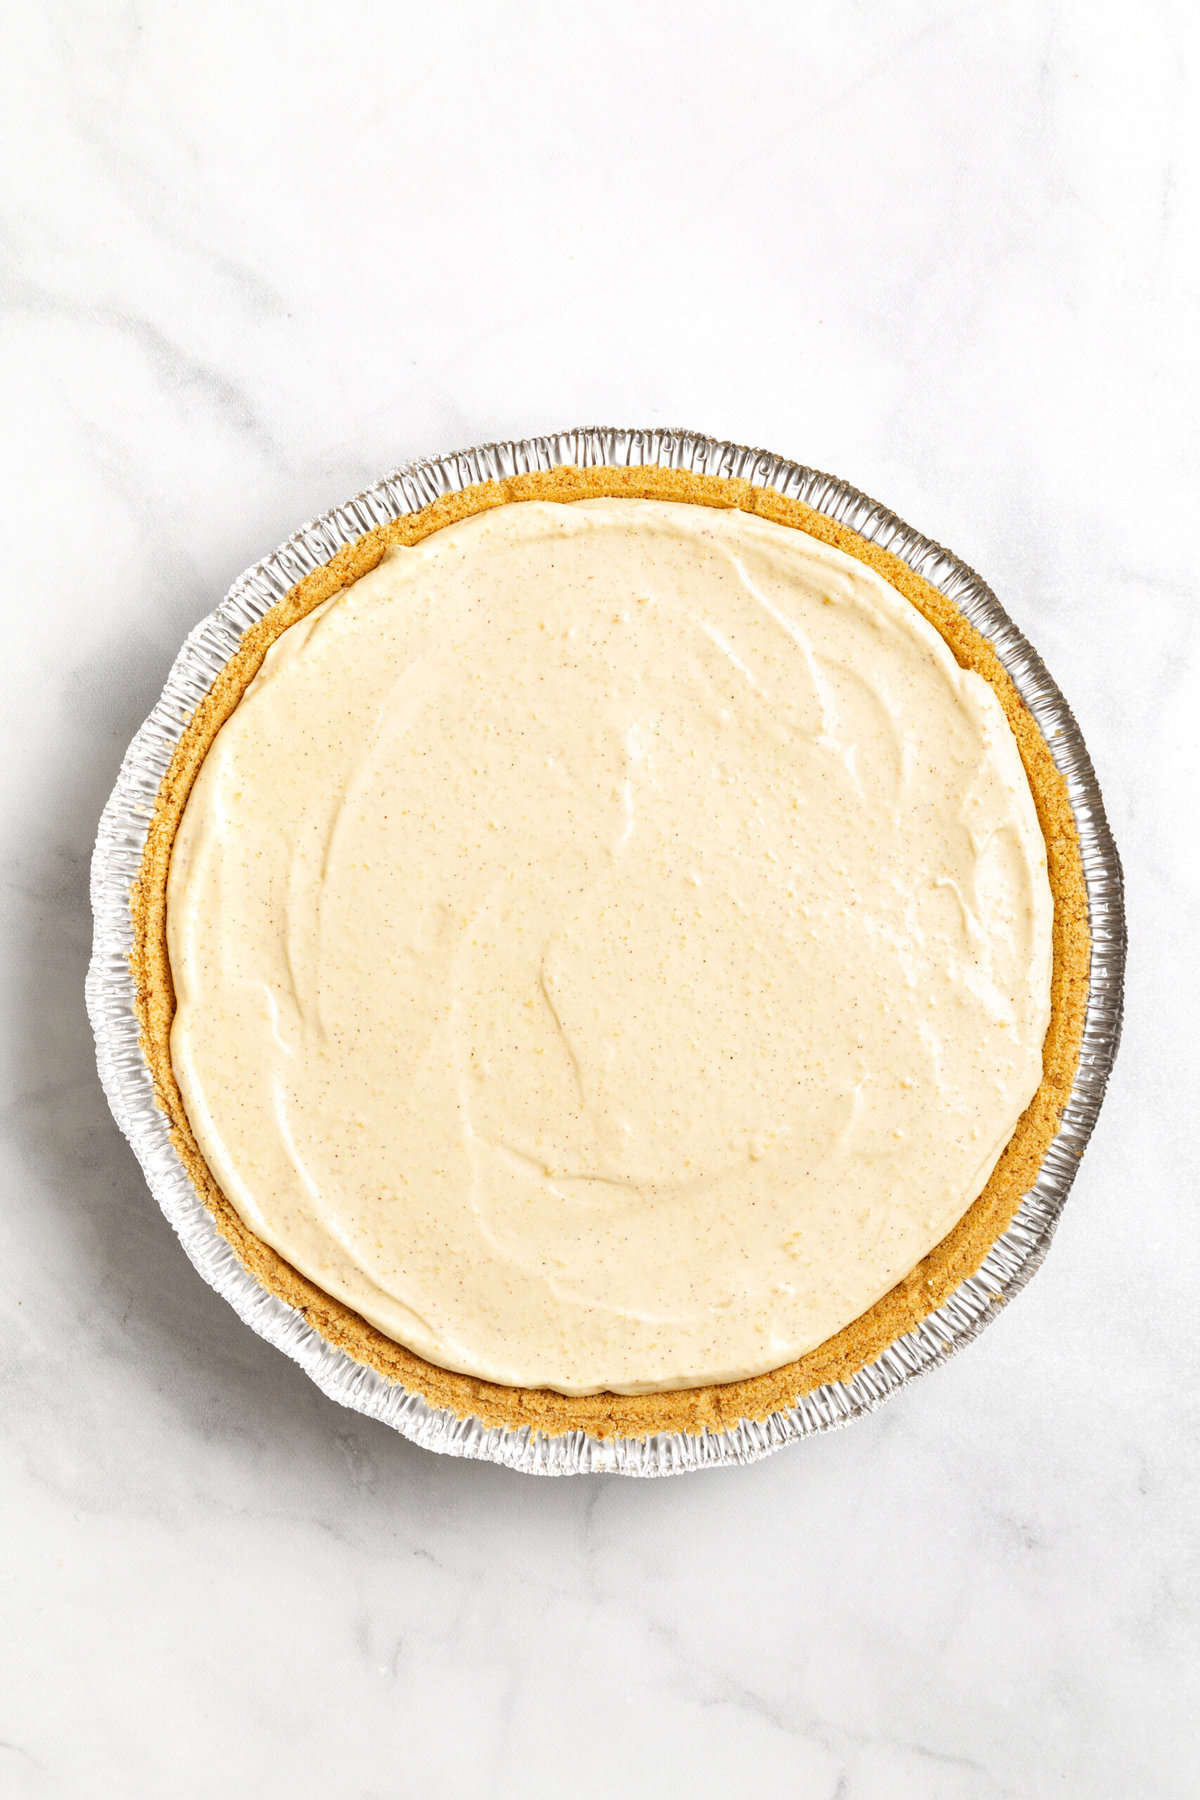 no bake egg nog filling in a store-bought pie crust. 